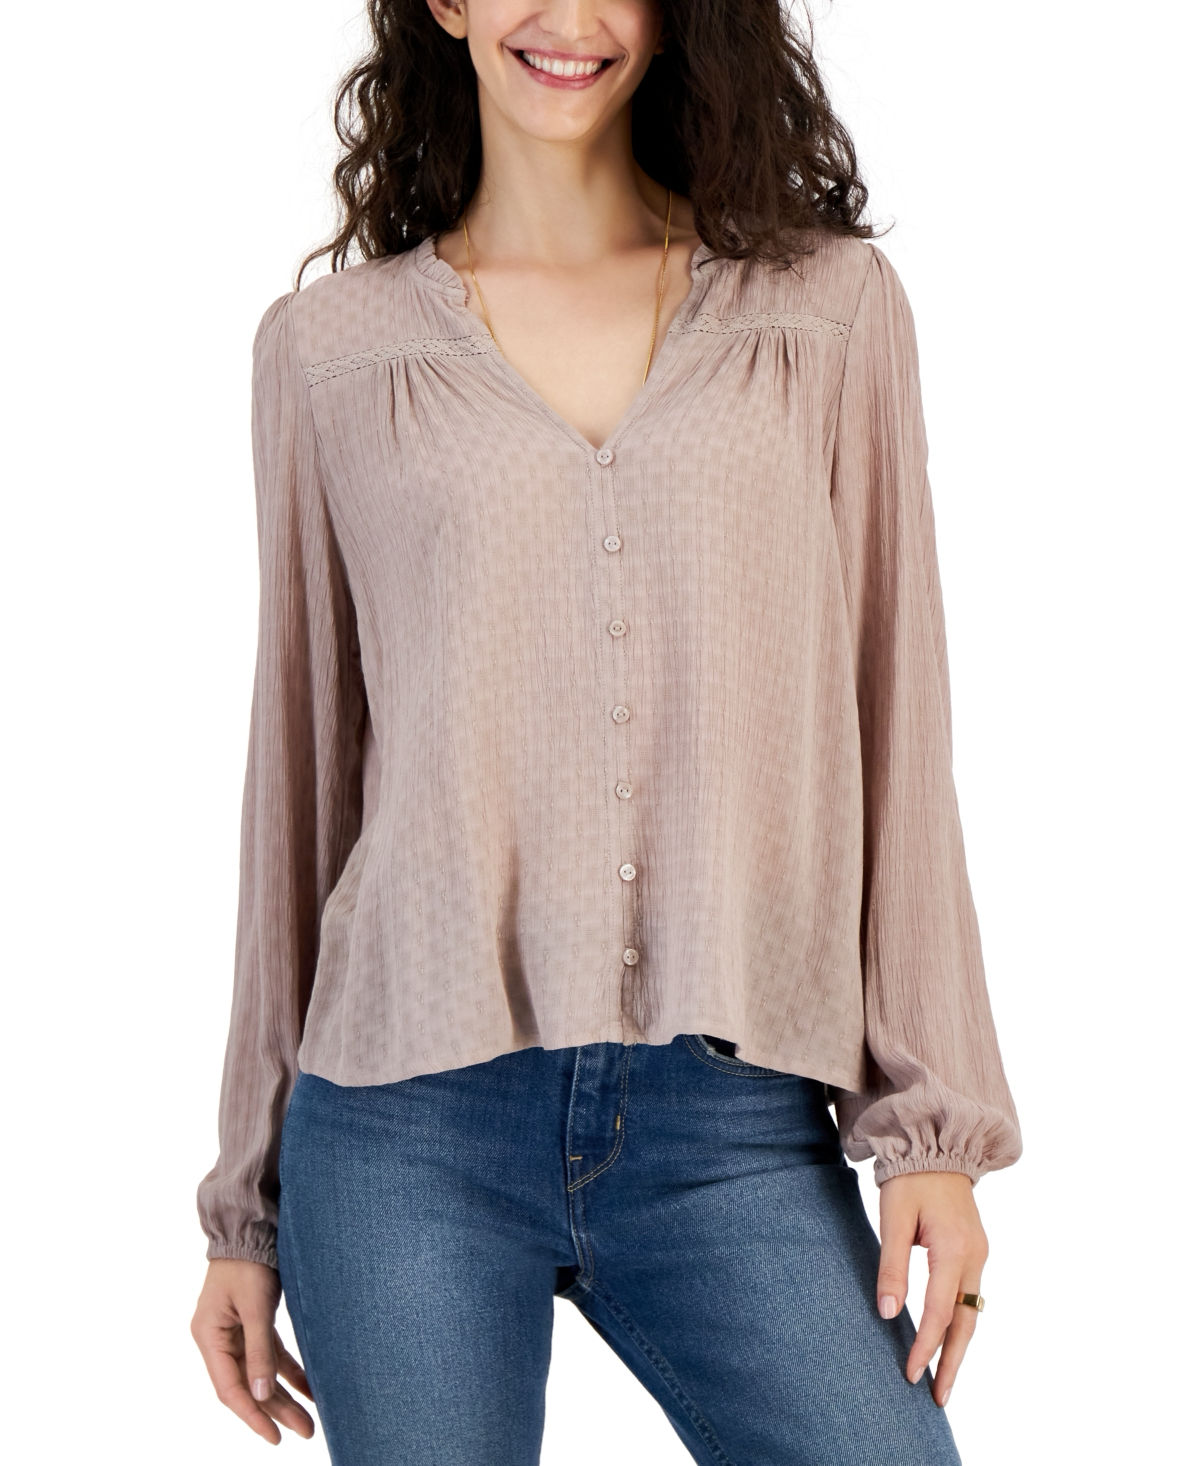 JUNIORS' V-NECK BUTTON-FRONT LONG-SLEEVE TOP IN MOCHA STONE Get ready to button up in style with this juniors' top from Hippie Rose, the perfect blend of chic and versatility that'll have you rocking fashionable looks from day to night, one button at a time. Juniors Juniors' Clothing - Tops (new)